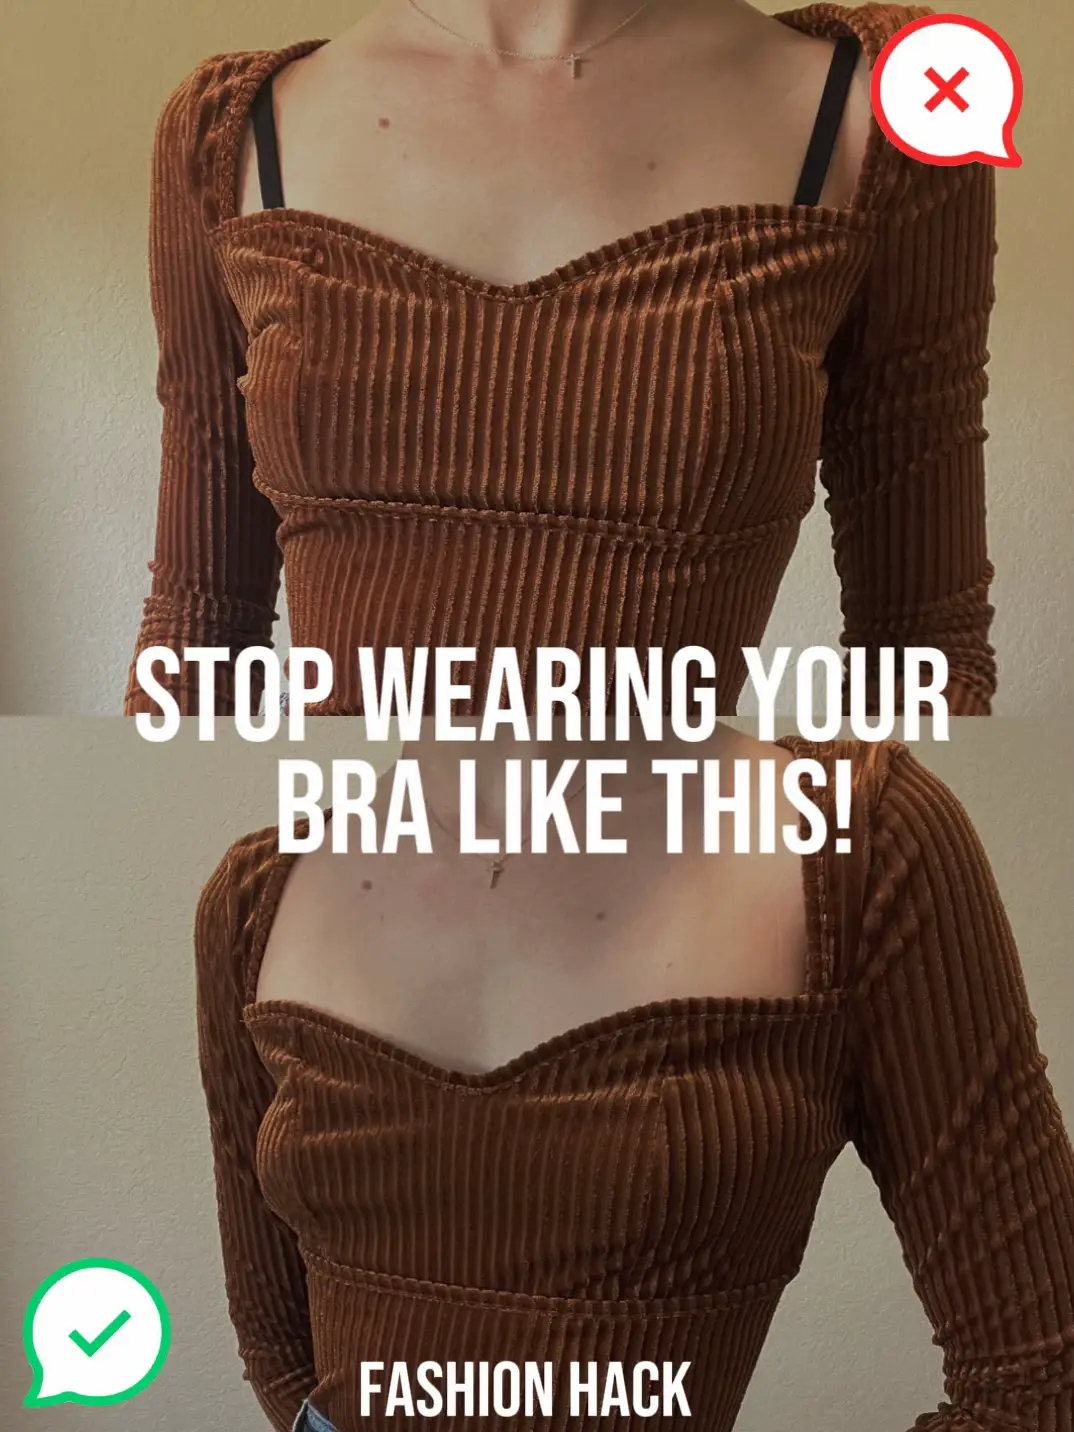 Bra Strap Hack!  Wearing a one shoulder top or dress & need to